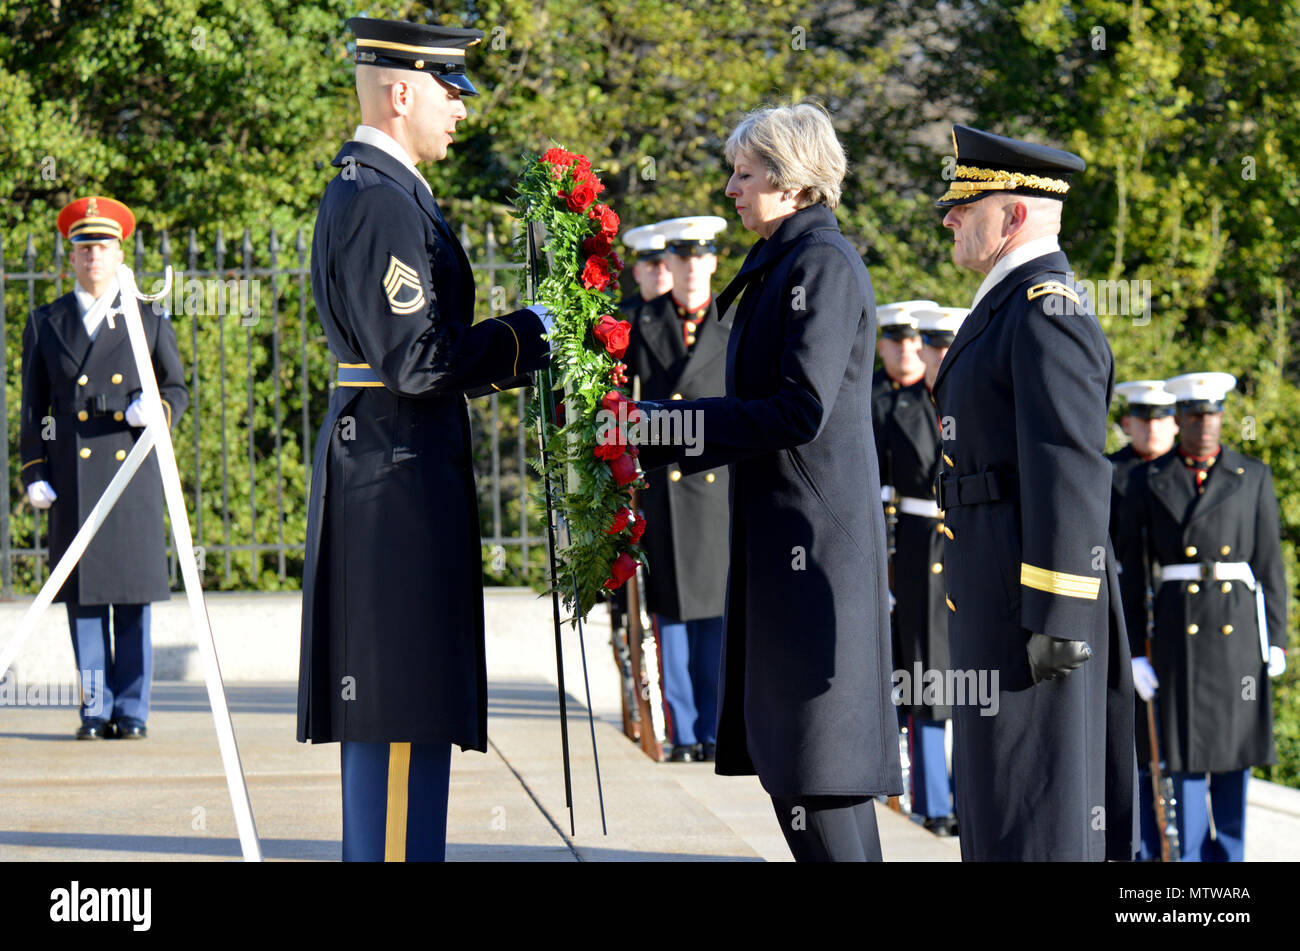 The Right Honorable Theresa May, Prime Minister of the United Kingdom, participated in an Armed Forces Full Honor wreath laying ceremony hosted by Maj. Gen. Bradley A. Becker, commanding general, Joint Force Headquarters-National Capital Region and The U.S. Army Military District of Washington, Jan. 27, 2017, at the Tomb of the Unknown Soldier, Arlington National Cemetery. The wreath laying is a part of the Prime Minister’s official visit to the United States. (U.S. Army photos by: Staff Sgt. Austin L. Thomas) Stock Photo